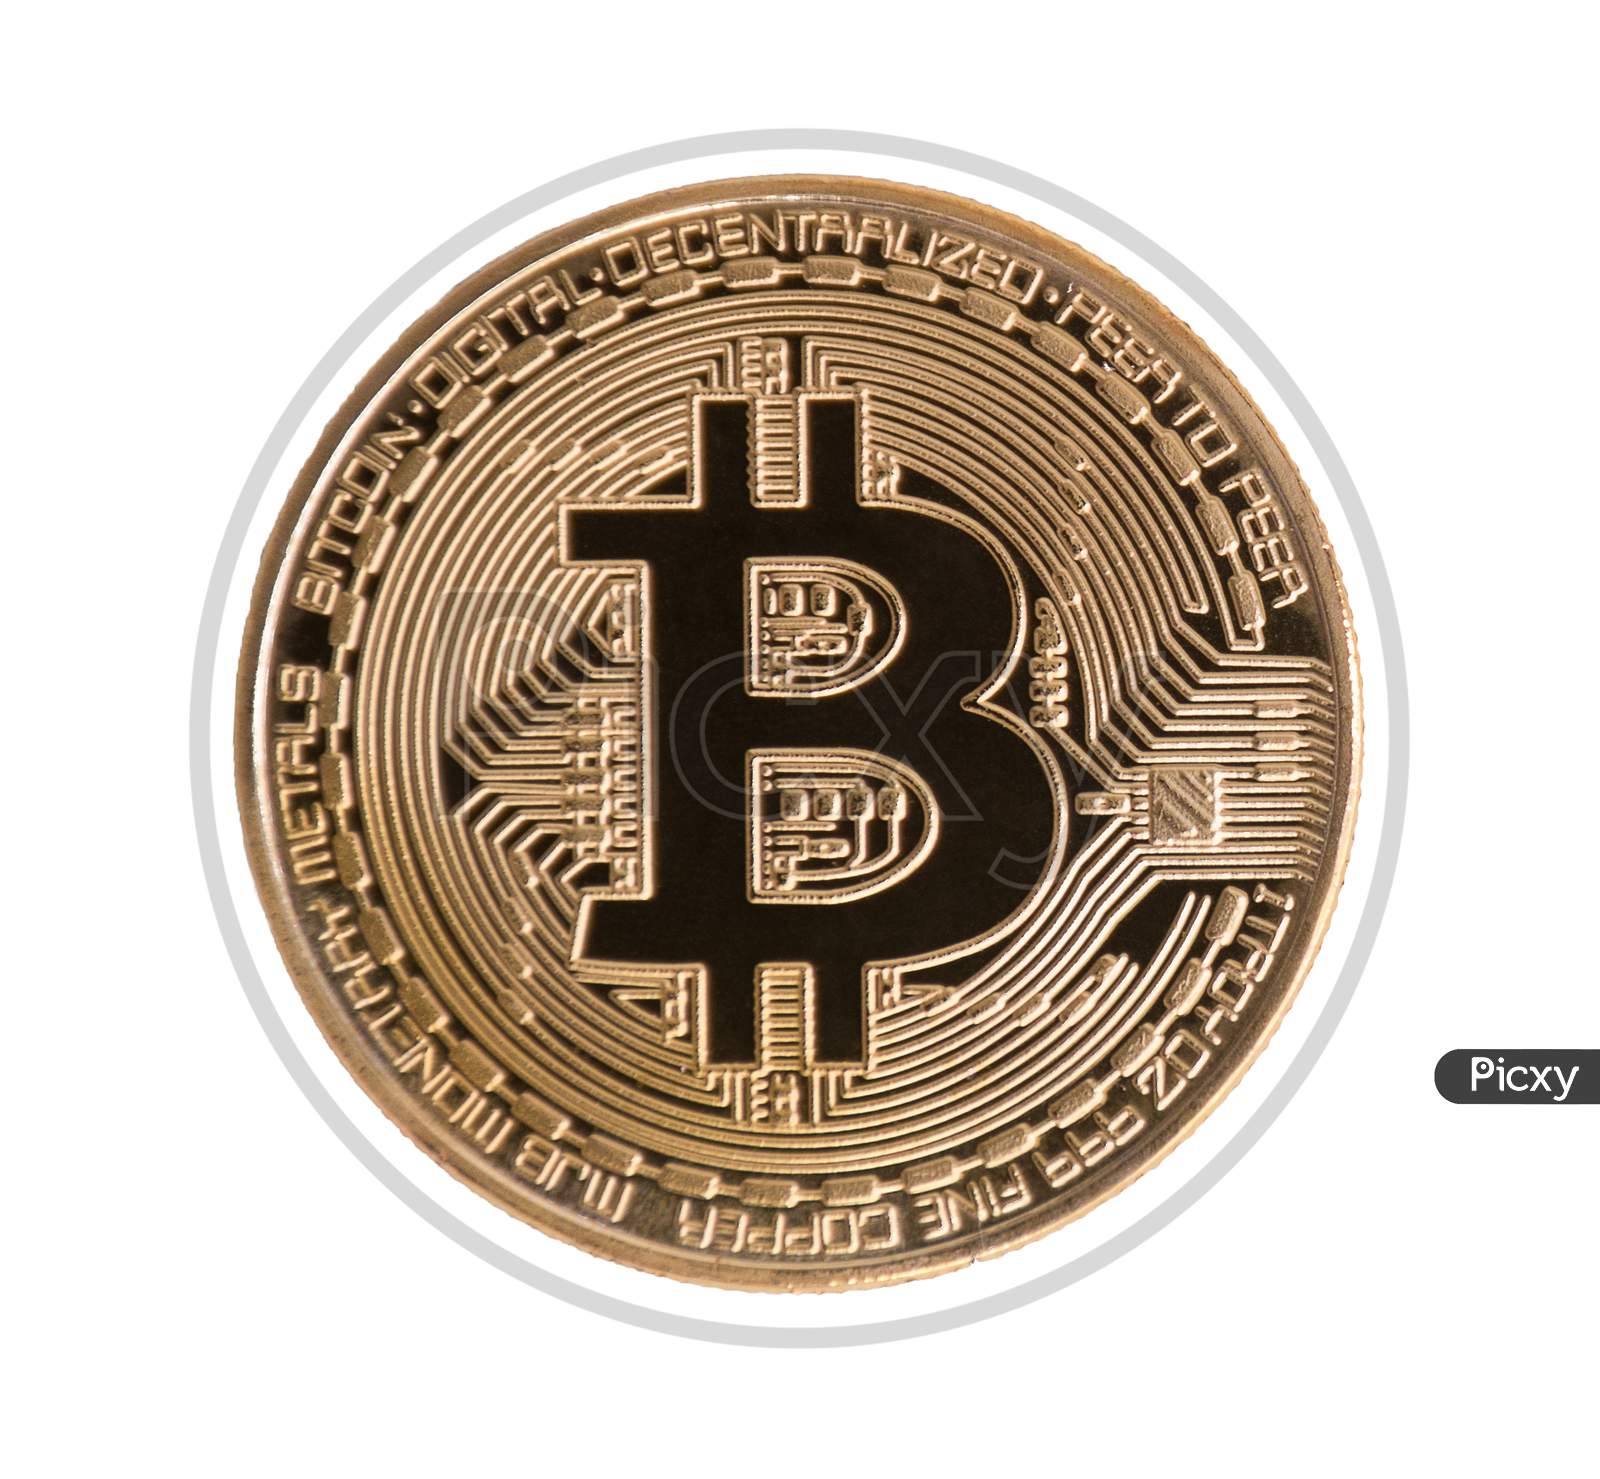 Golden Bitcoin On Isolated White Background. Clipping Path. Financial And Business Investment Trading Concept. Money Currency And Cryptocurrency Theme.